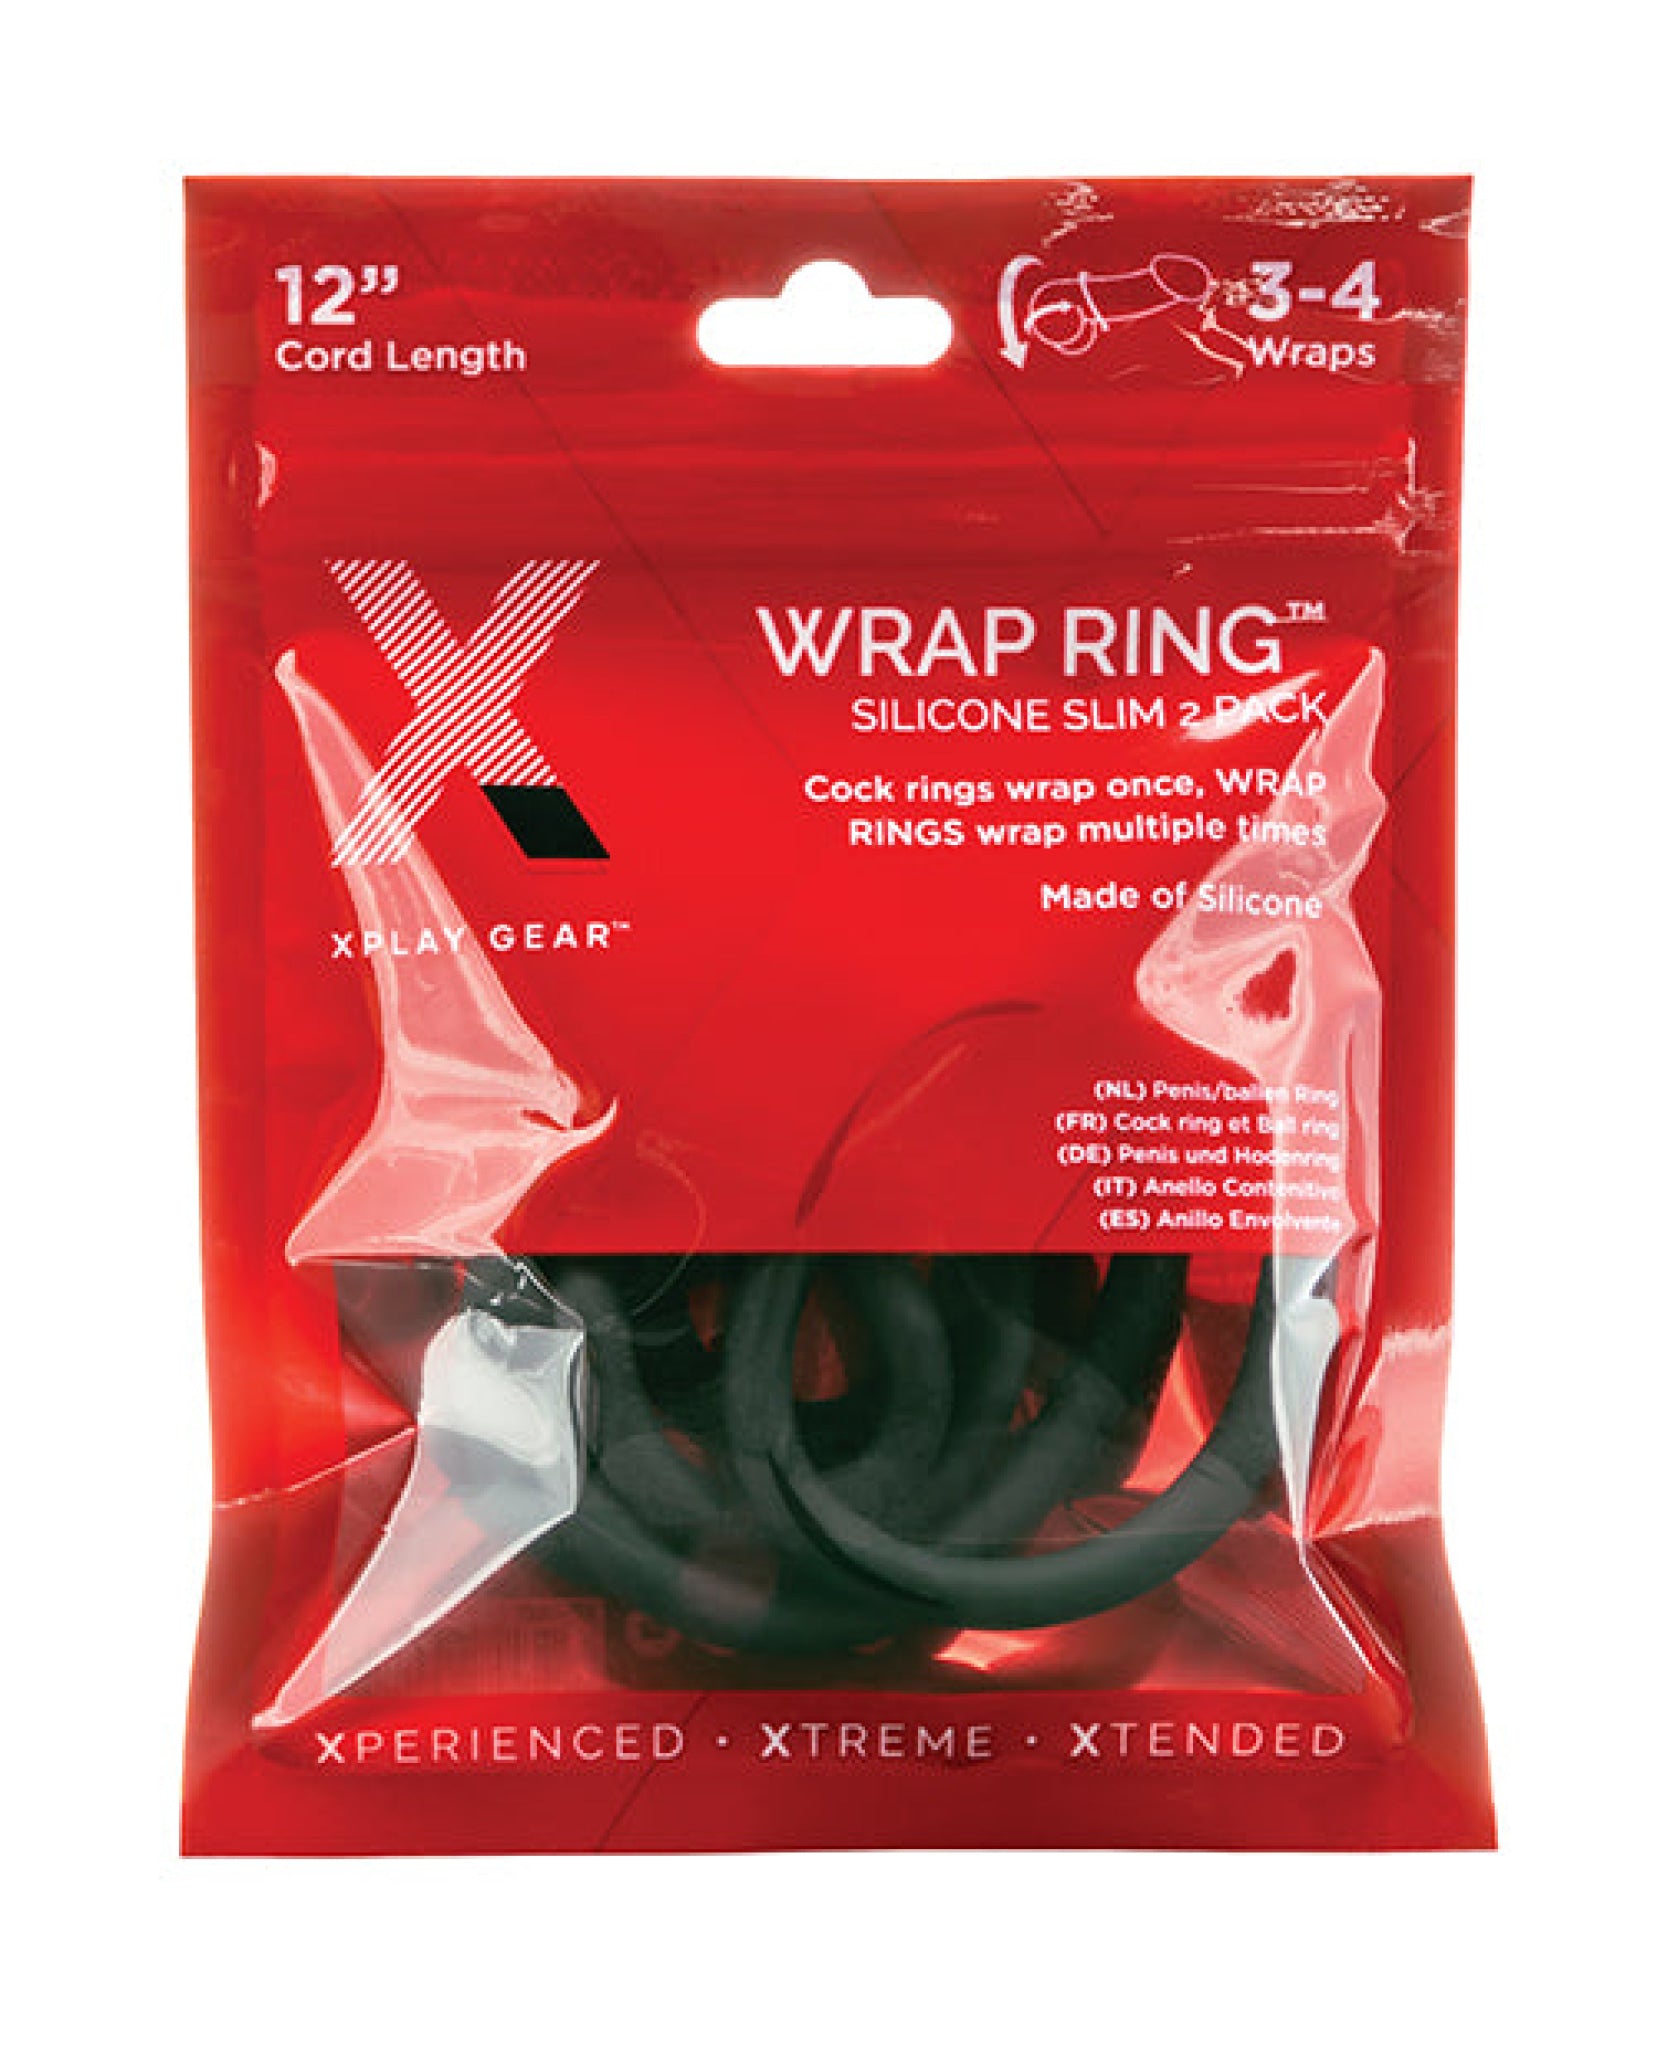 Xplay Gear Silicone 12.0" Slim Wrap Ring - Black Pack Of 2 Perfect Fit